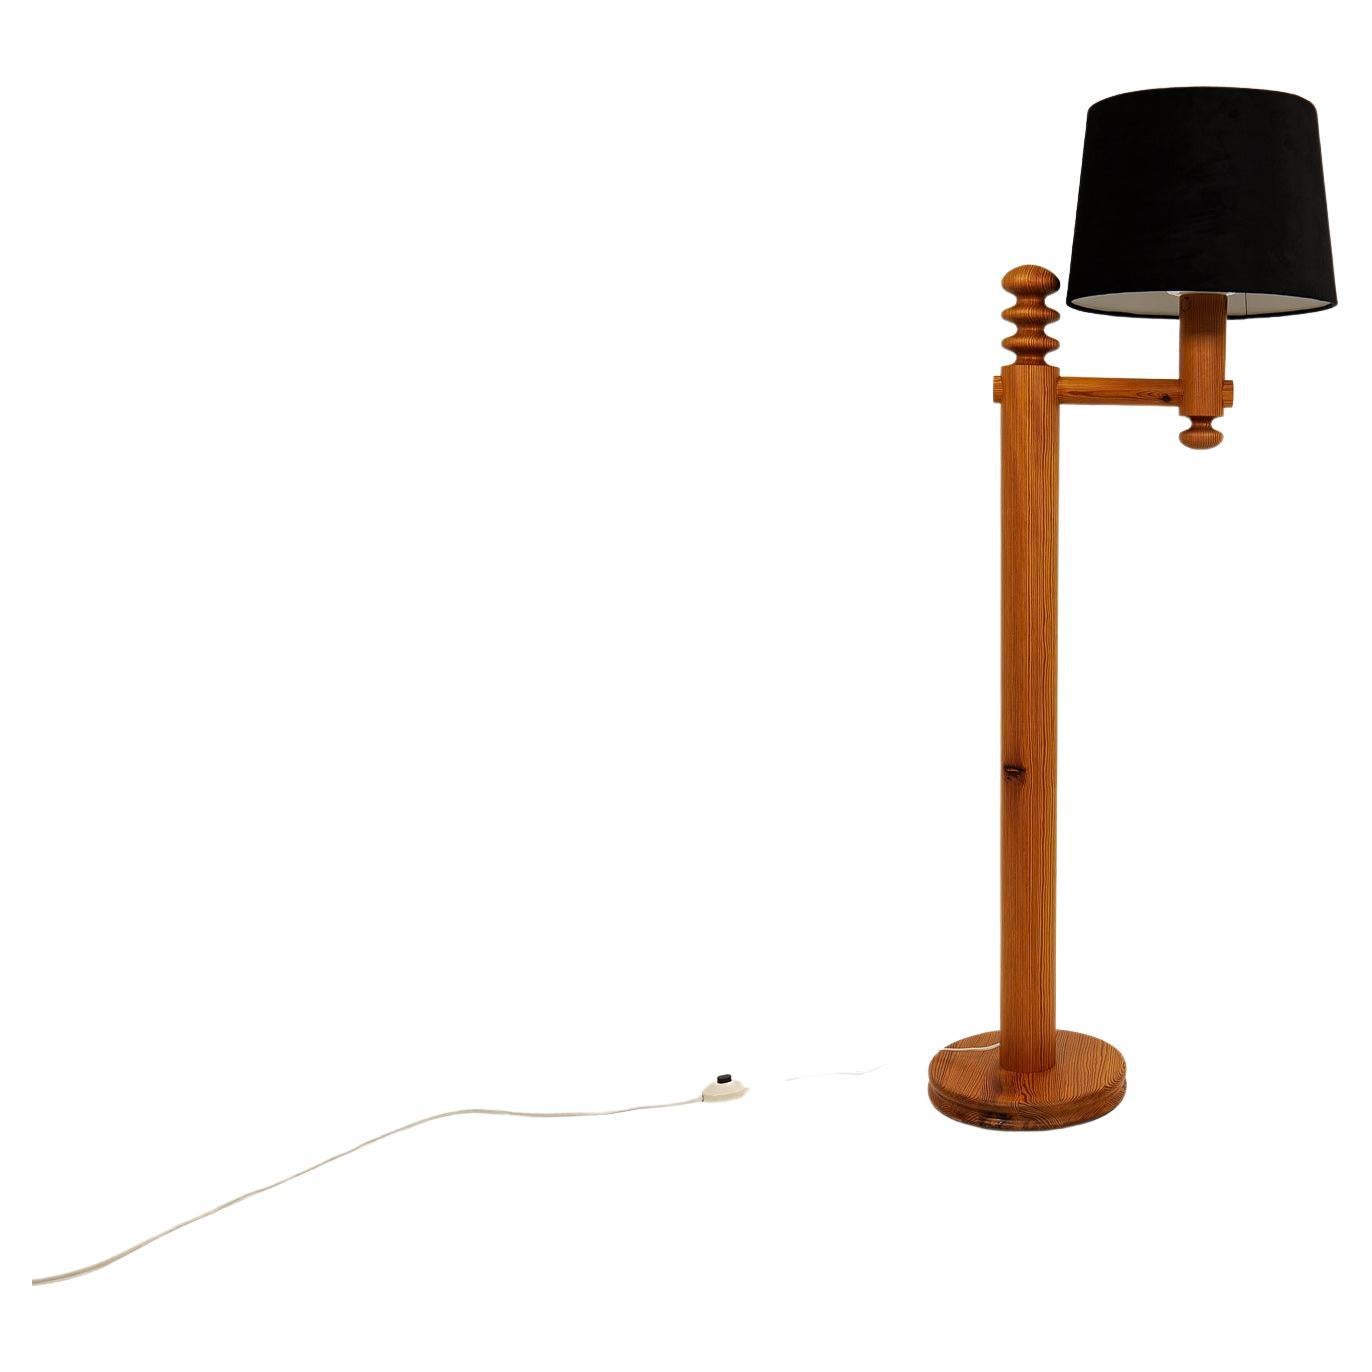 Floor lamp manufactured in Sweden and designed by Uno Kristiansson. It’s made in solid pine. This one with organically sculptured pine that gives a wonderful living floor lamp. 

Original acrylic shade with a newly added textile shade. 

Nice